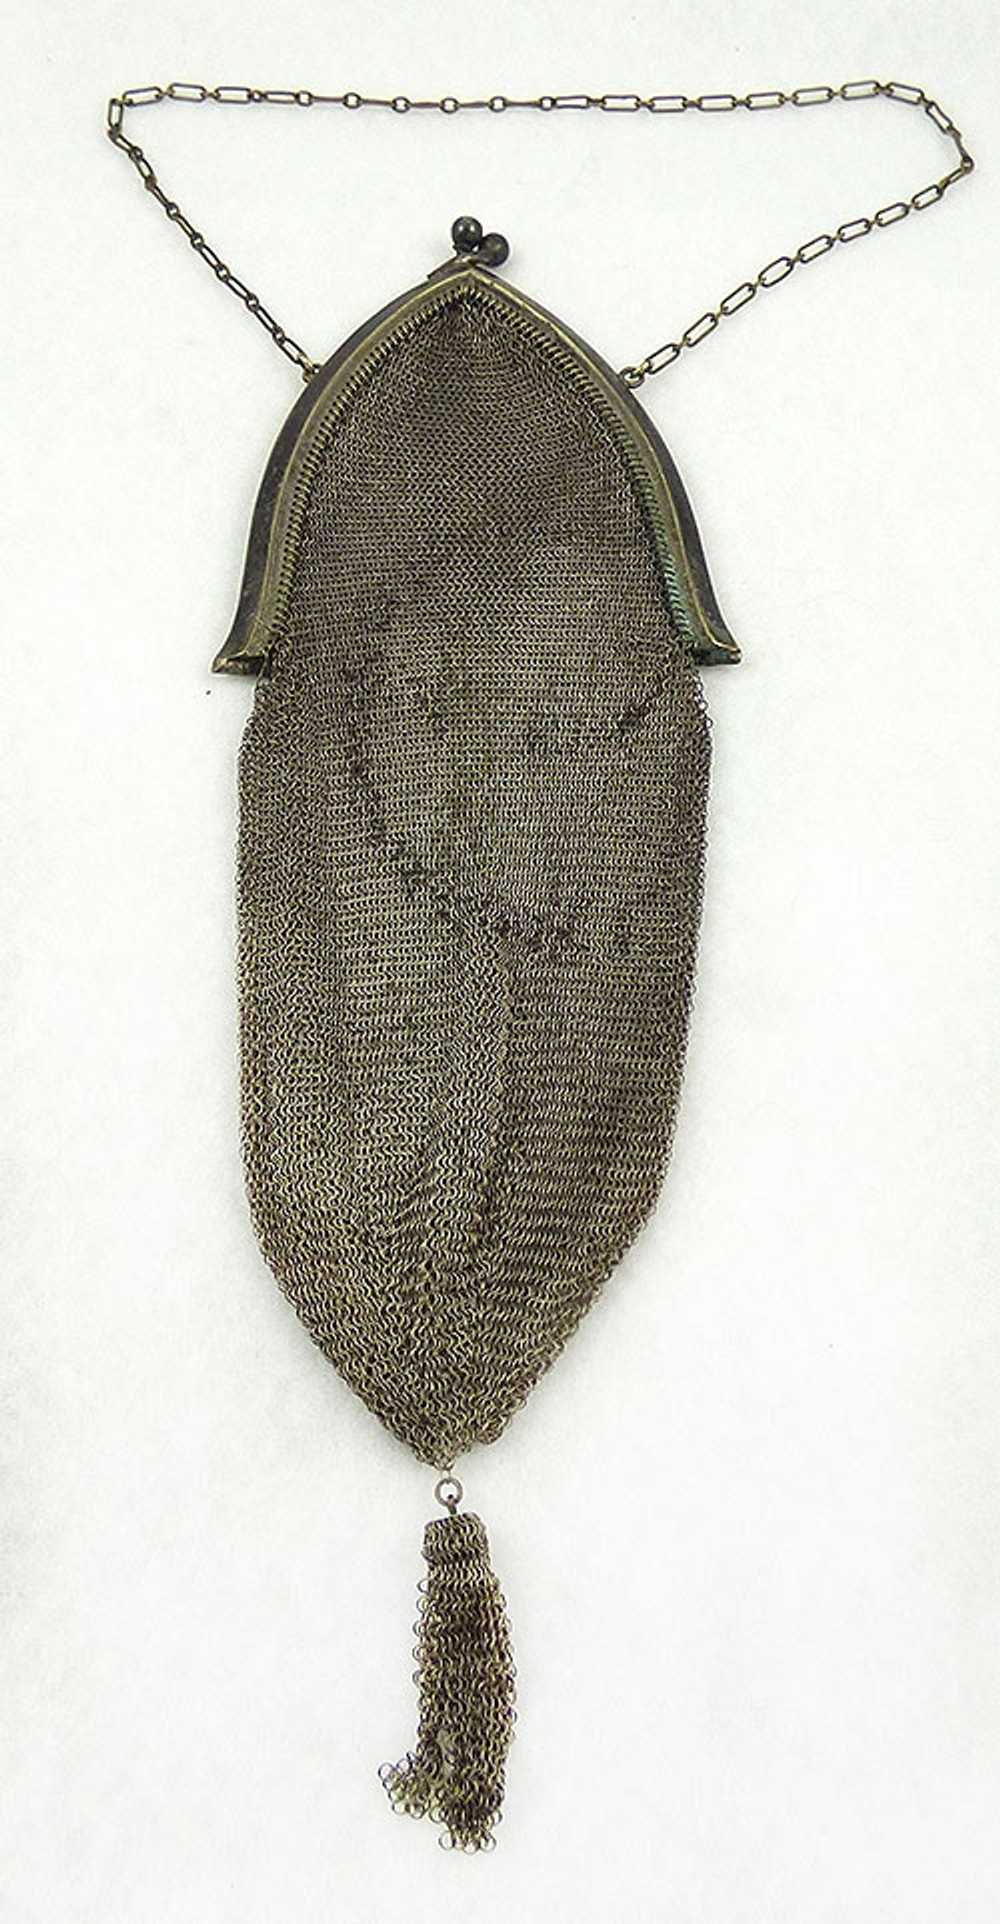 Whiting and Davis Silver Mesh Purse - image 1